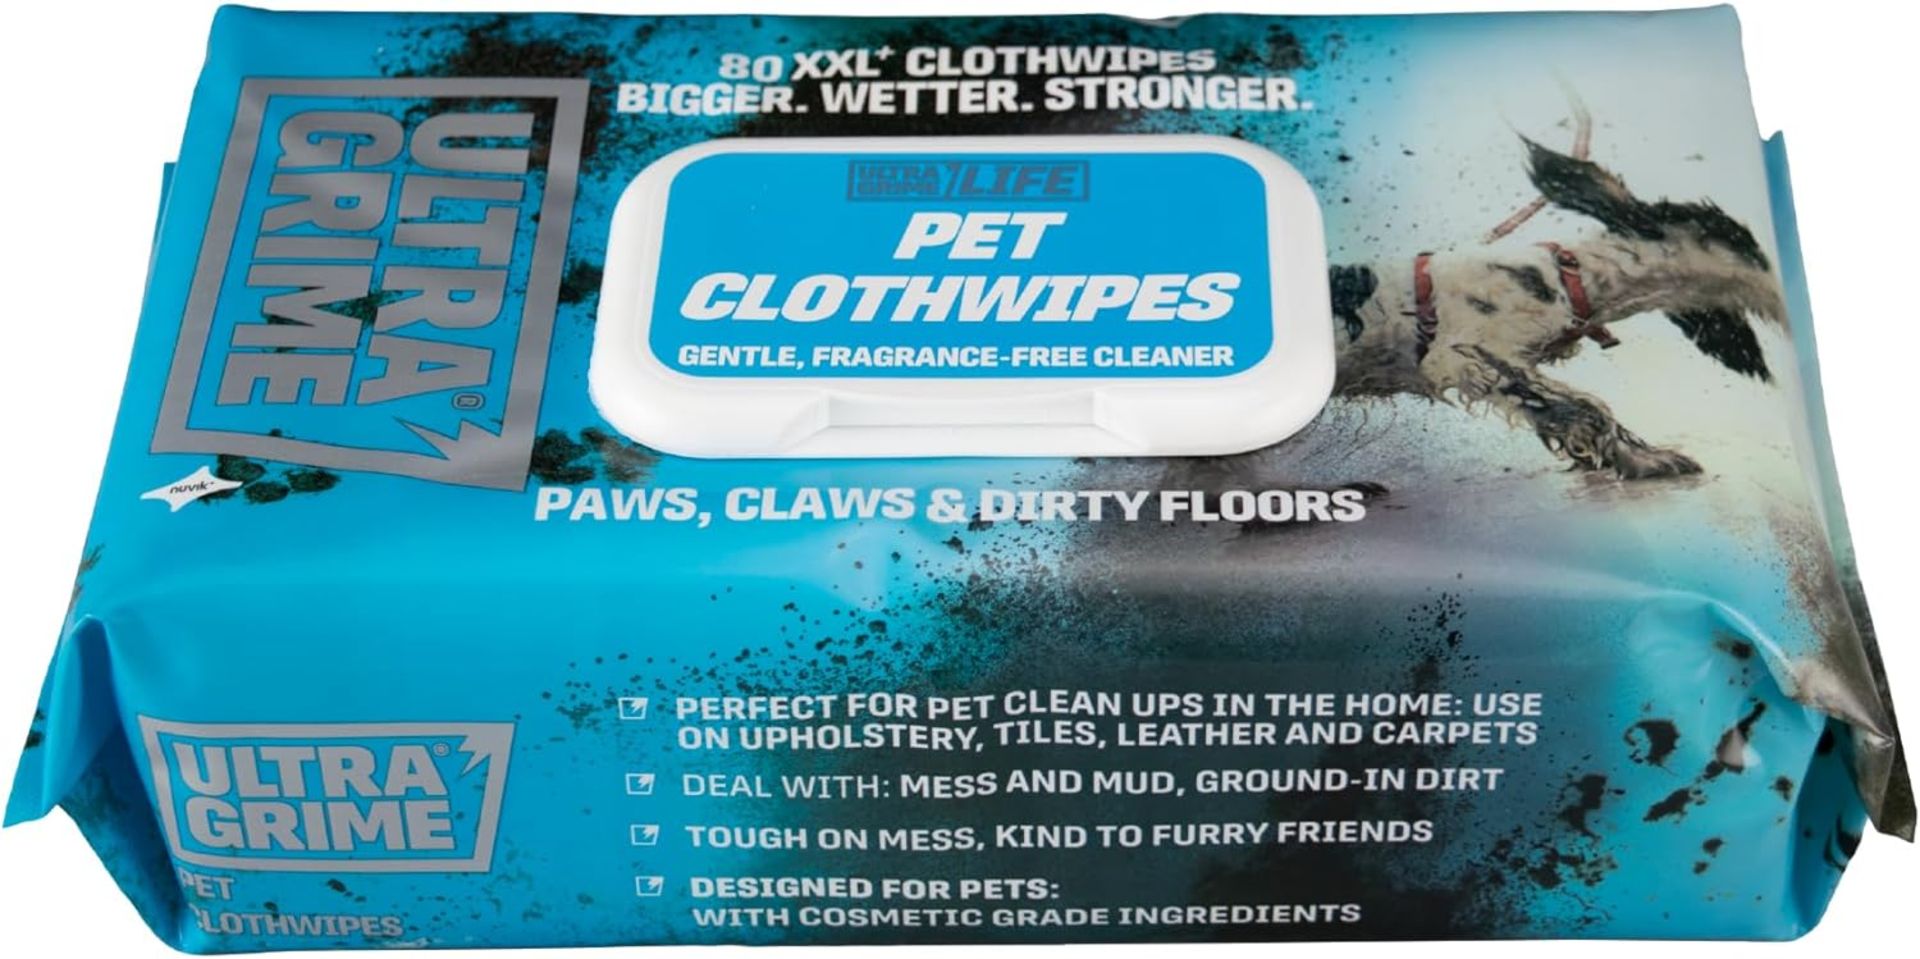 19 X BRAND NEW PACKS OF ULTRA GRIME 80 XXL PET CLOTH WIPES R10-3